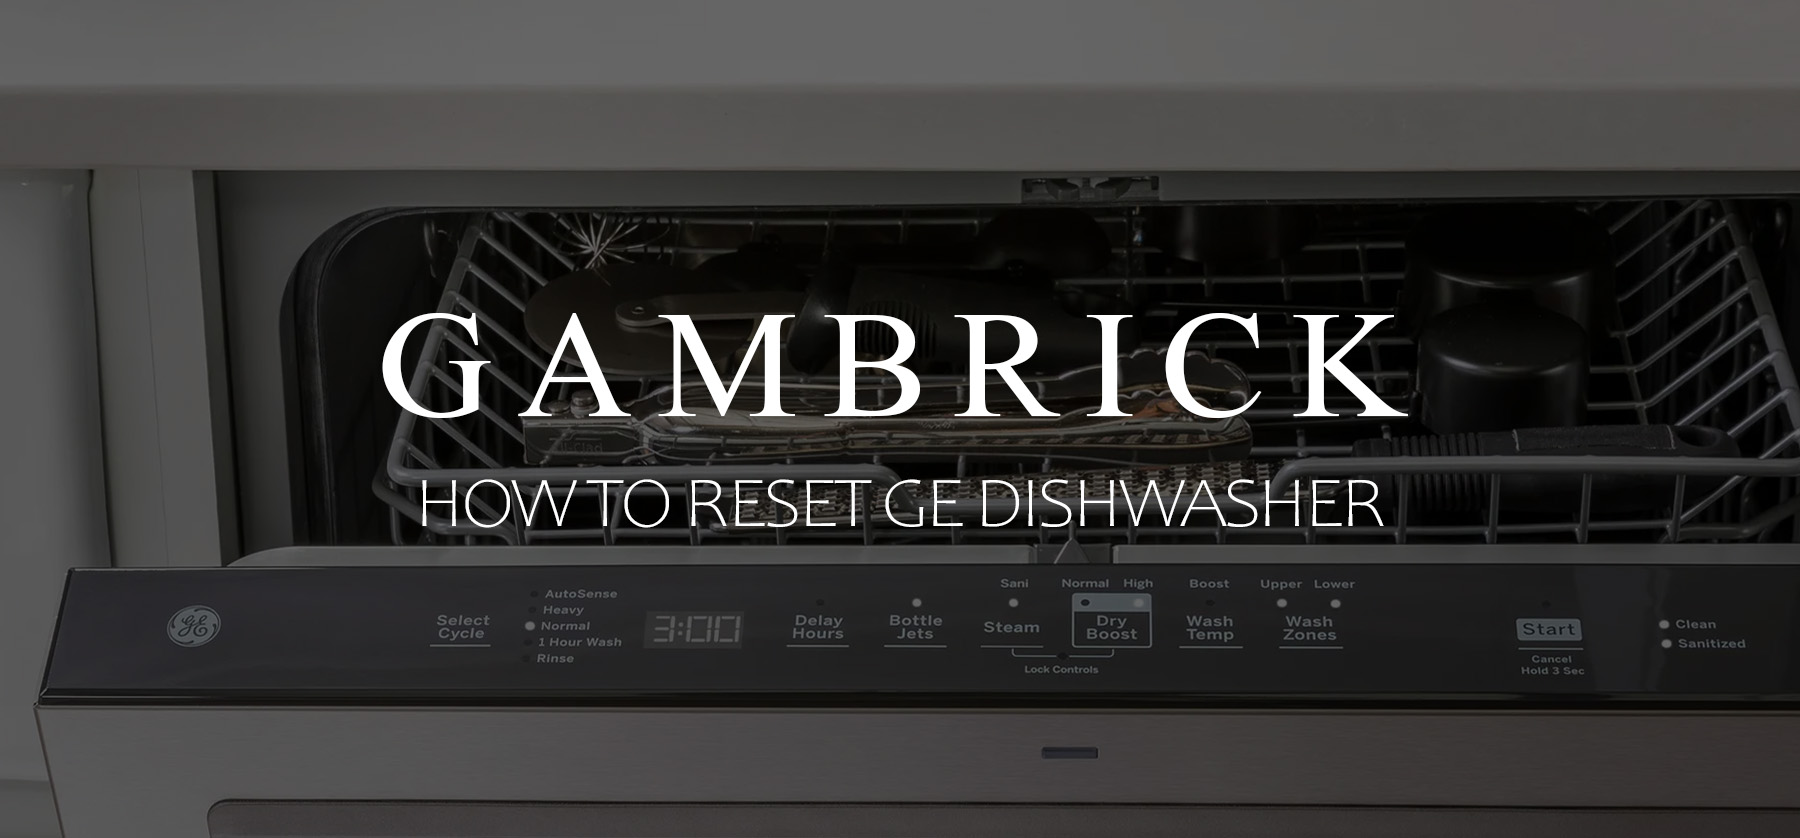 how to reset GE dishwasher banner 1.0